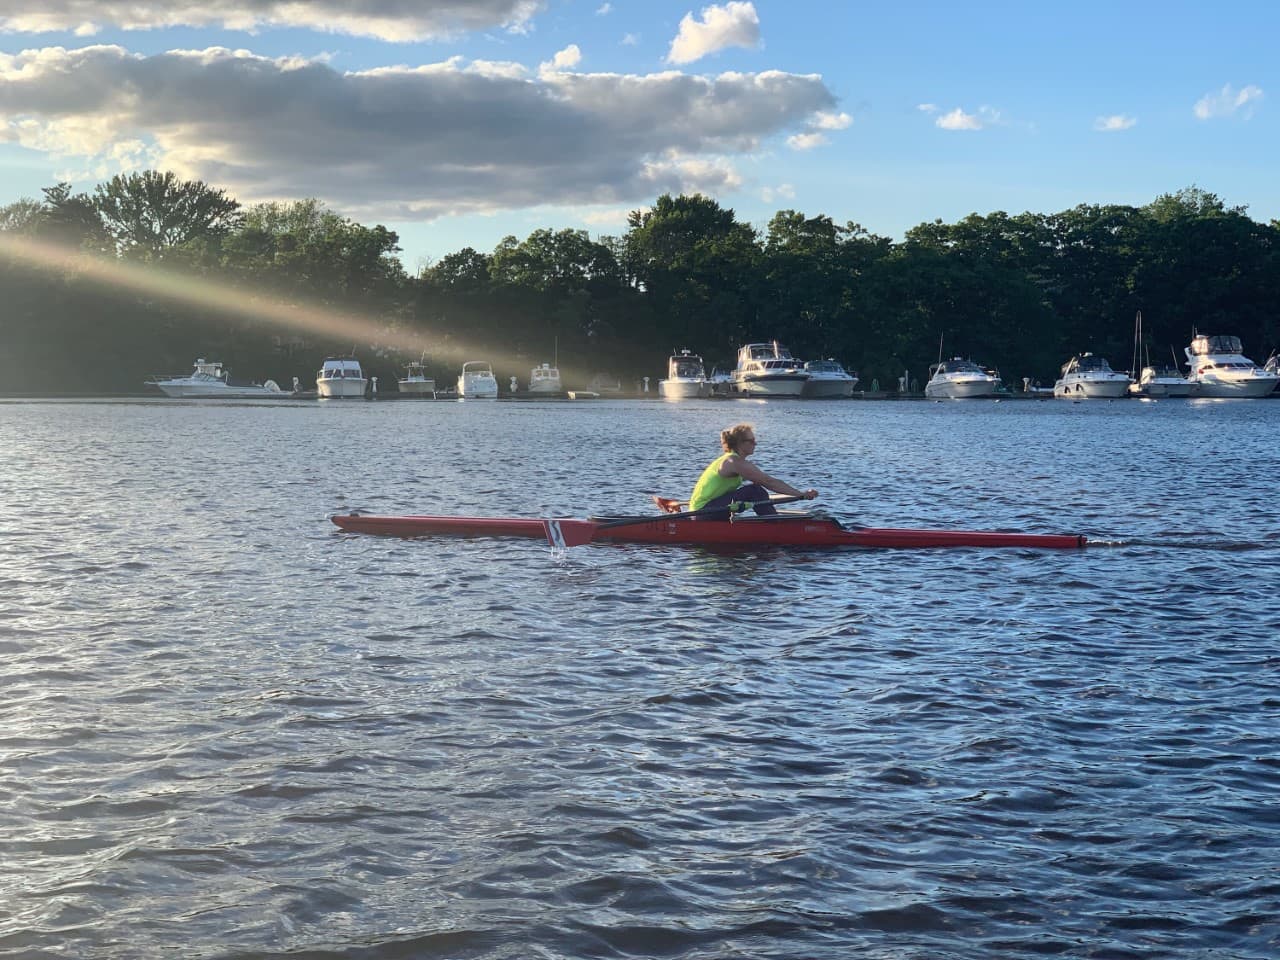 On Regatta Weekend, A Rower's Love For The Sport Helps Her Heal